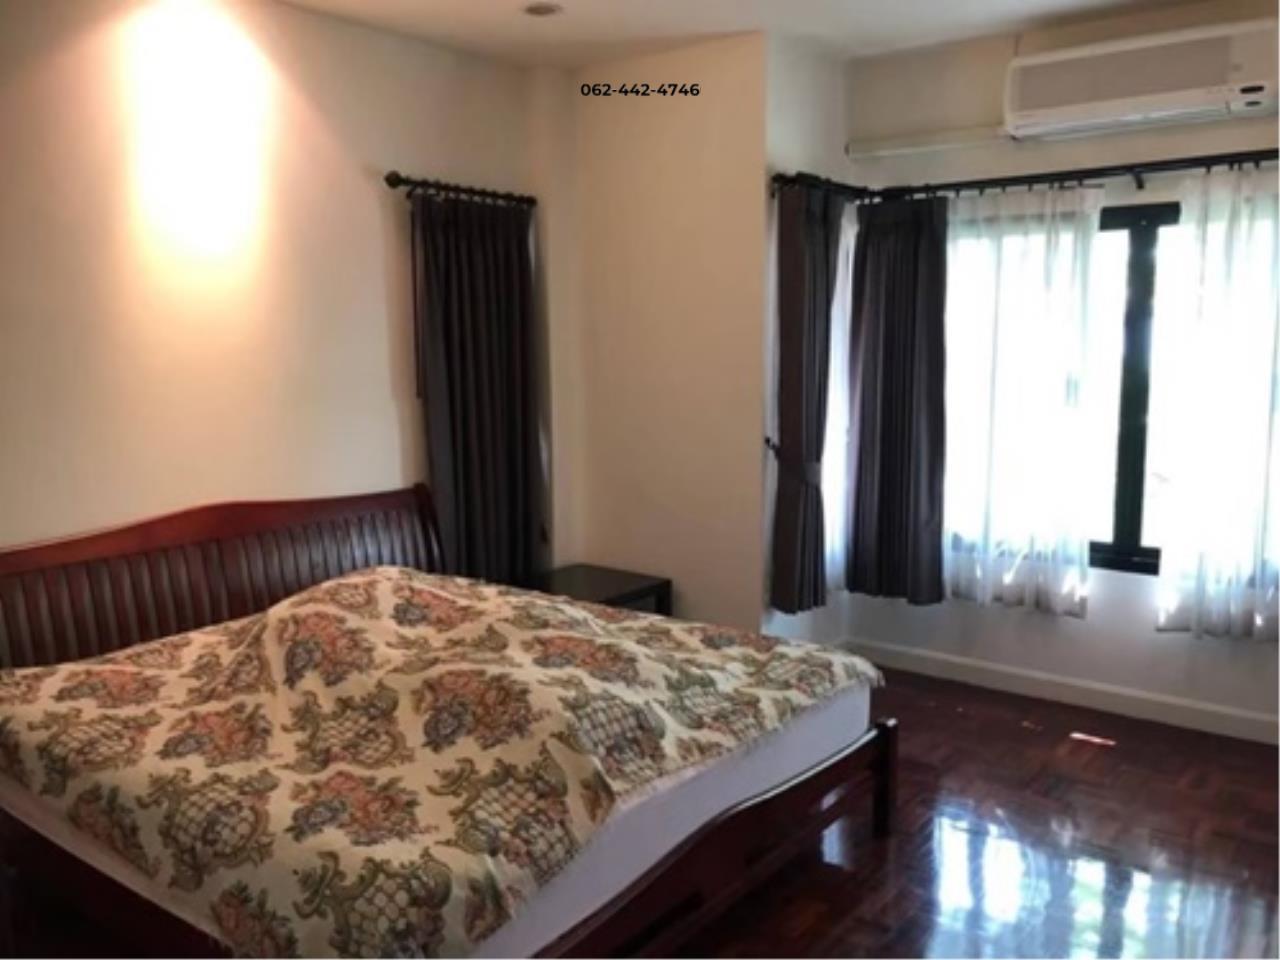 Jangproperty Agency's PUH_00161 House for sale Lanna Montra Hang Dong Chiang Mai  5